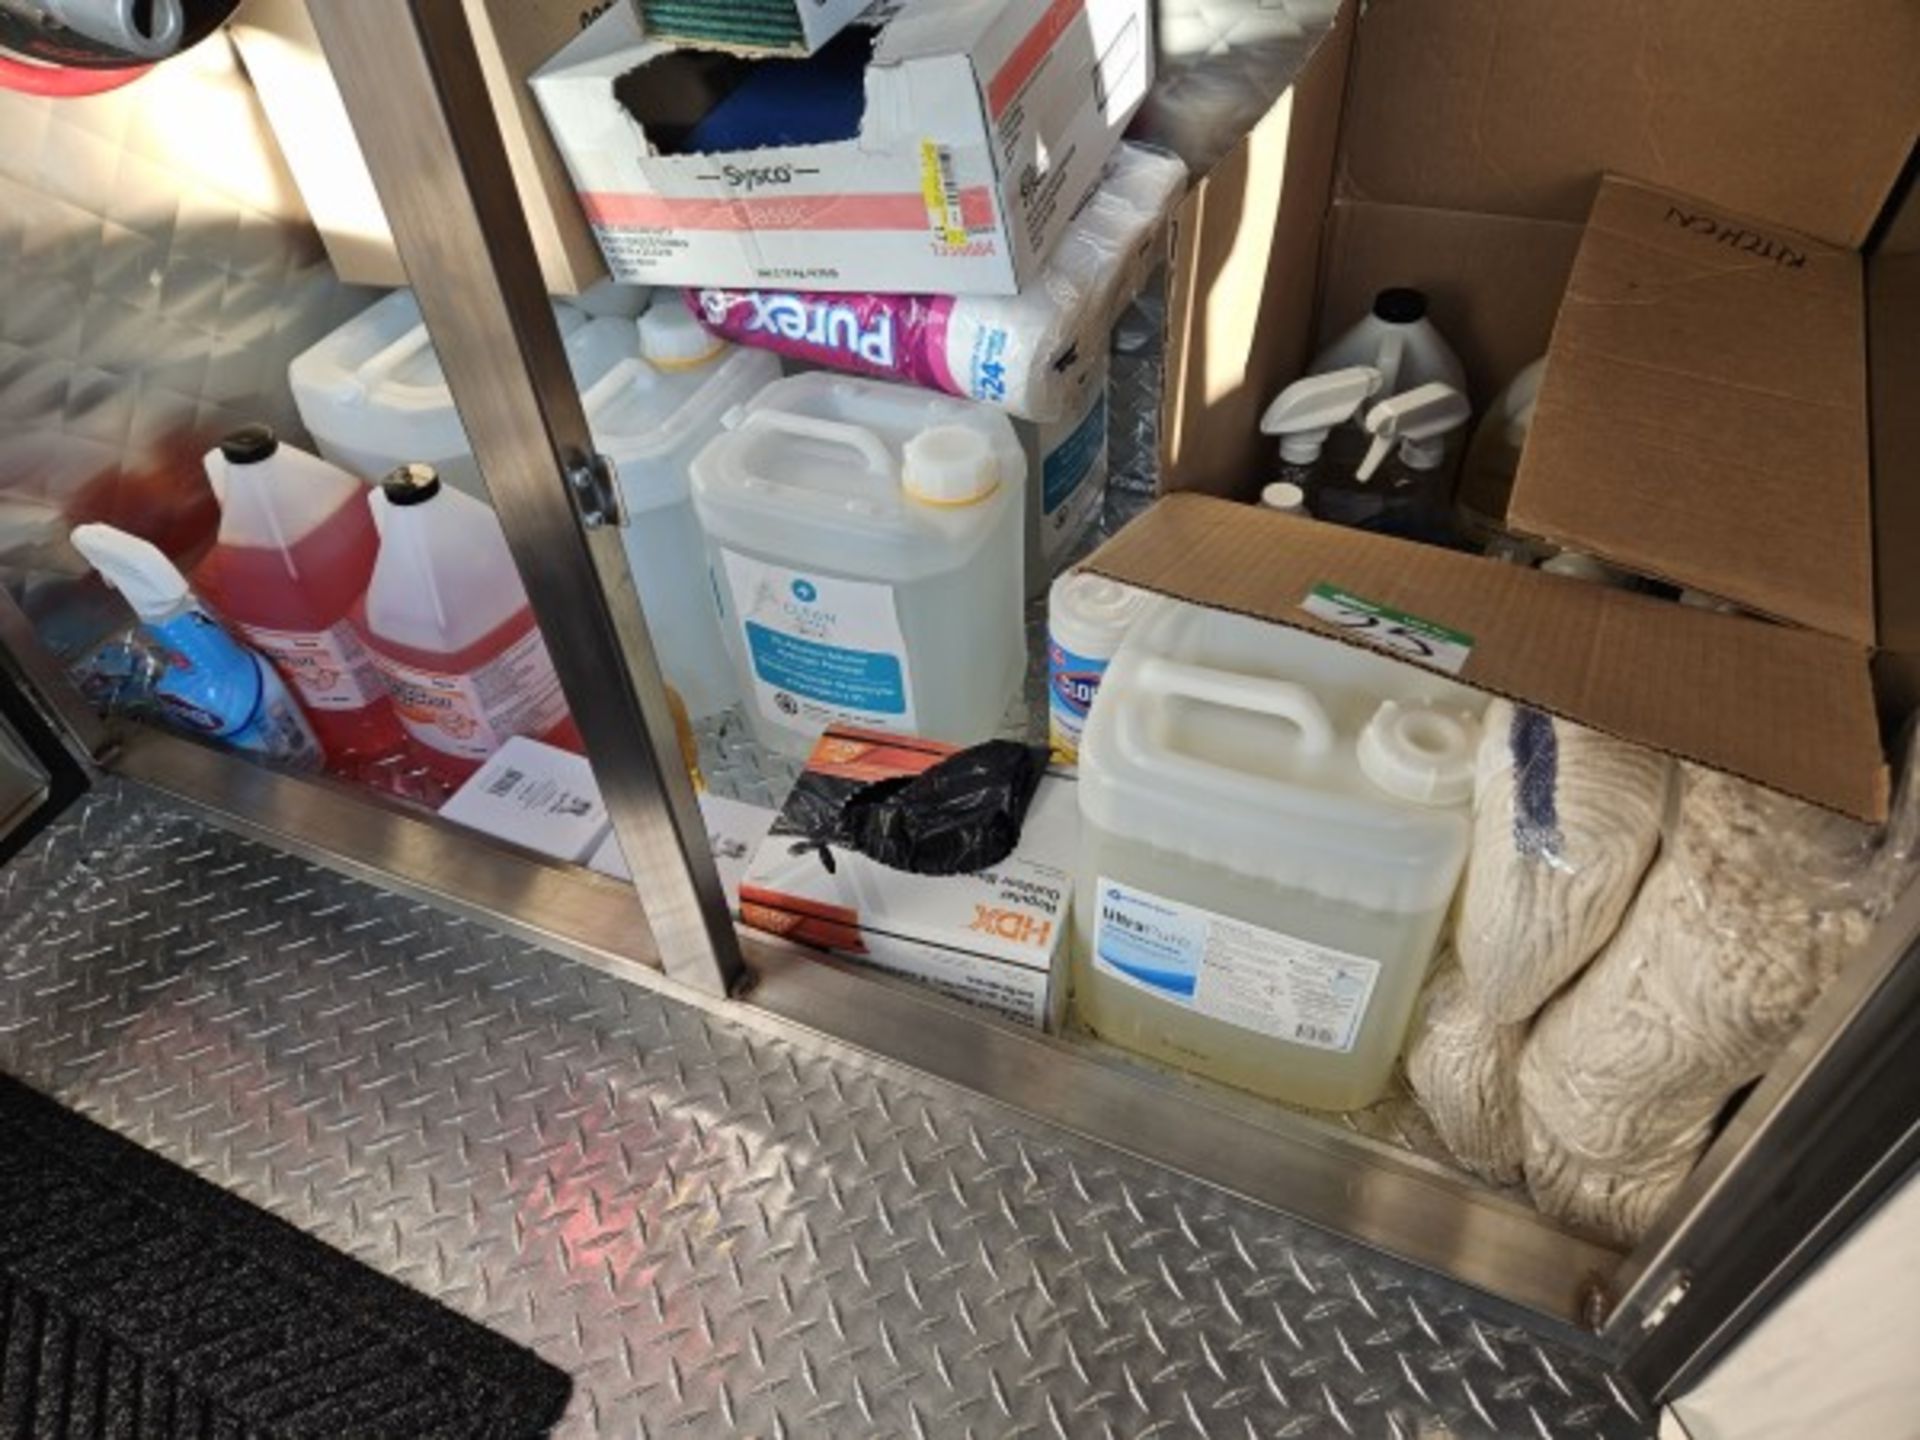 LOT OF ASSORTED CLEANING SUPPLIES AND SANITIZING PRODUCT See terms in full description.